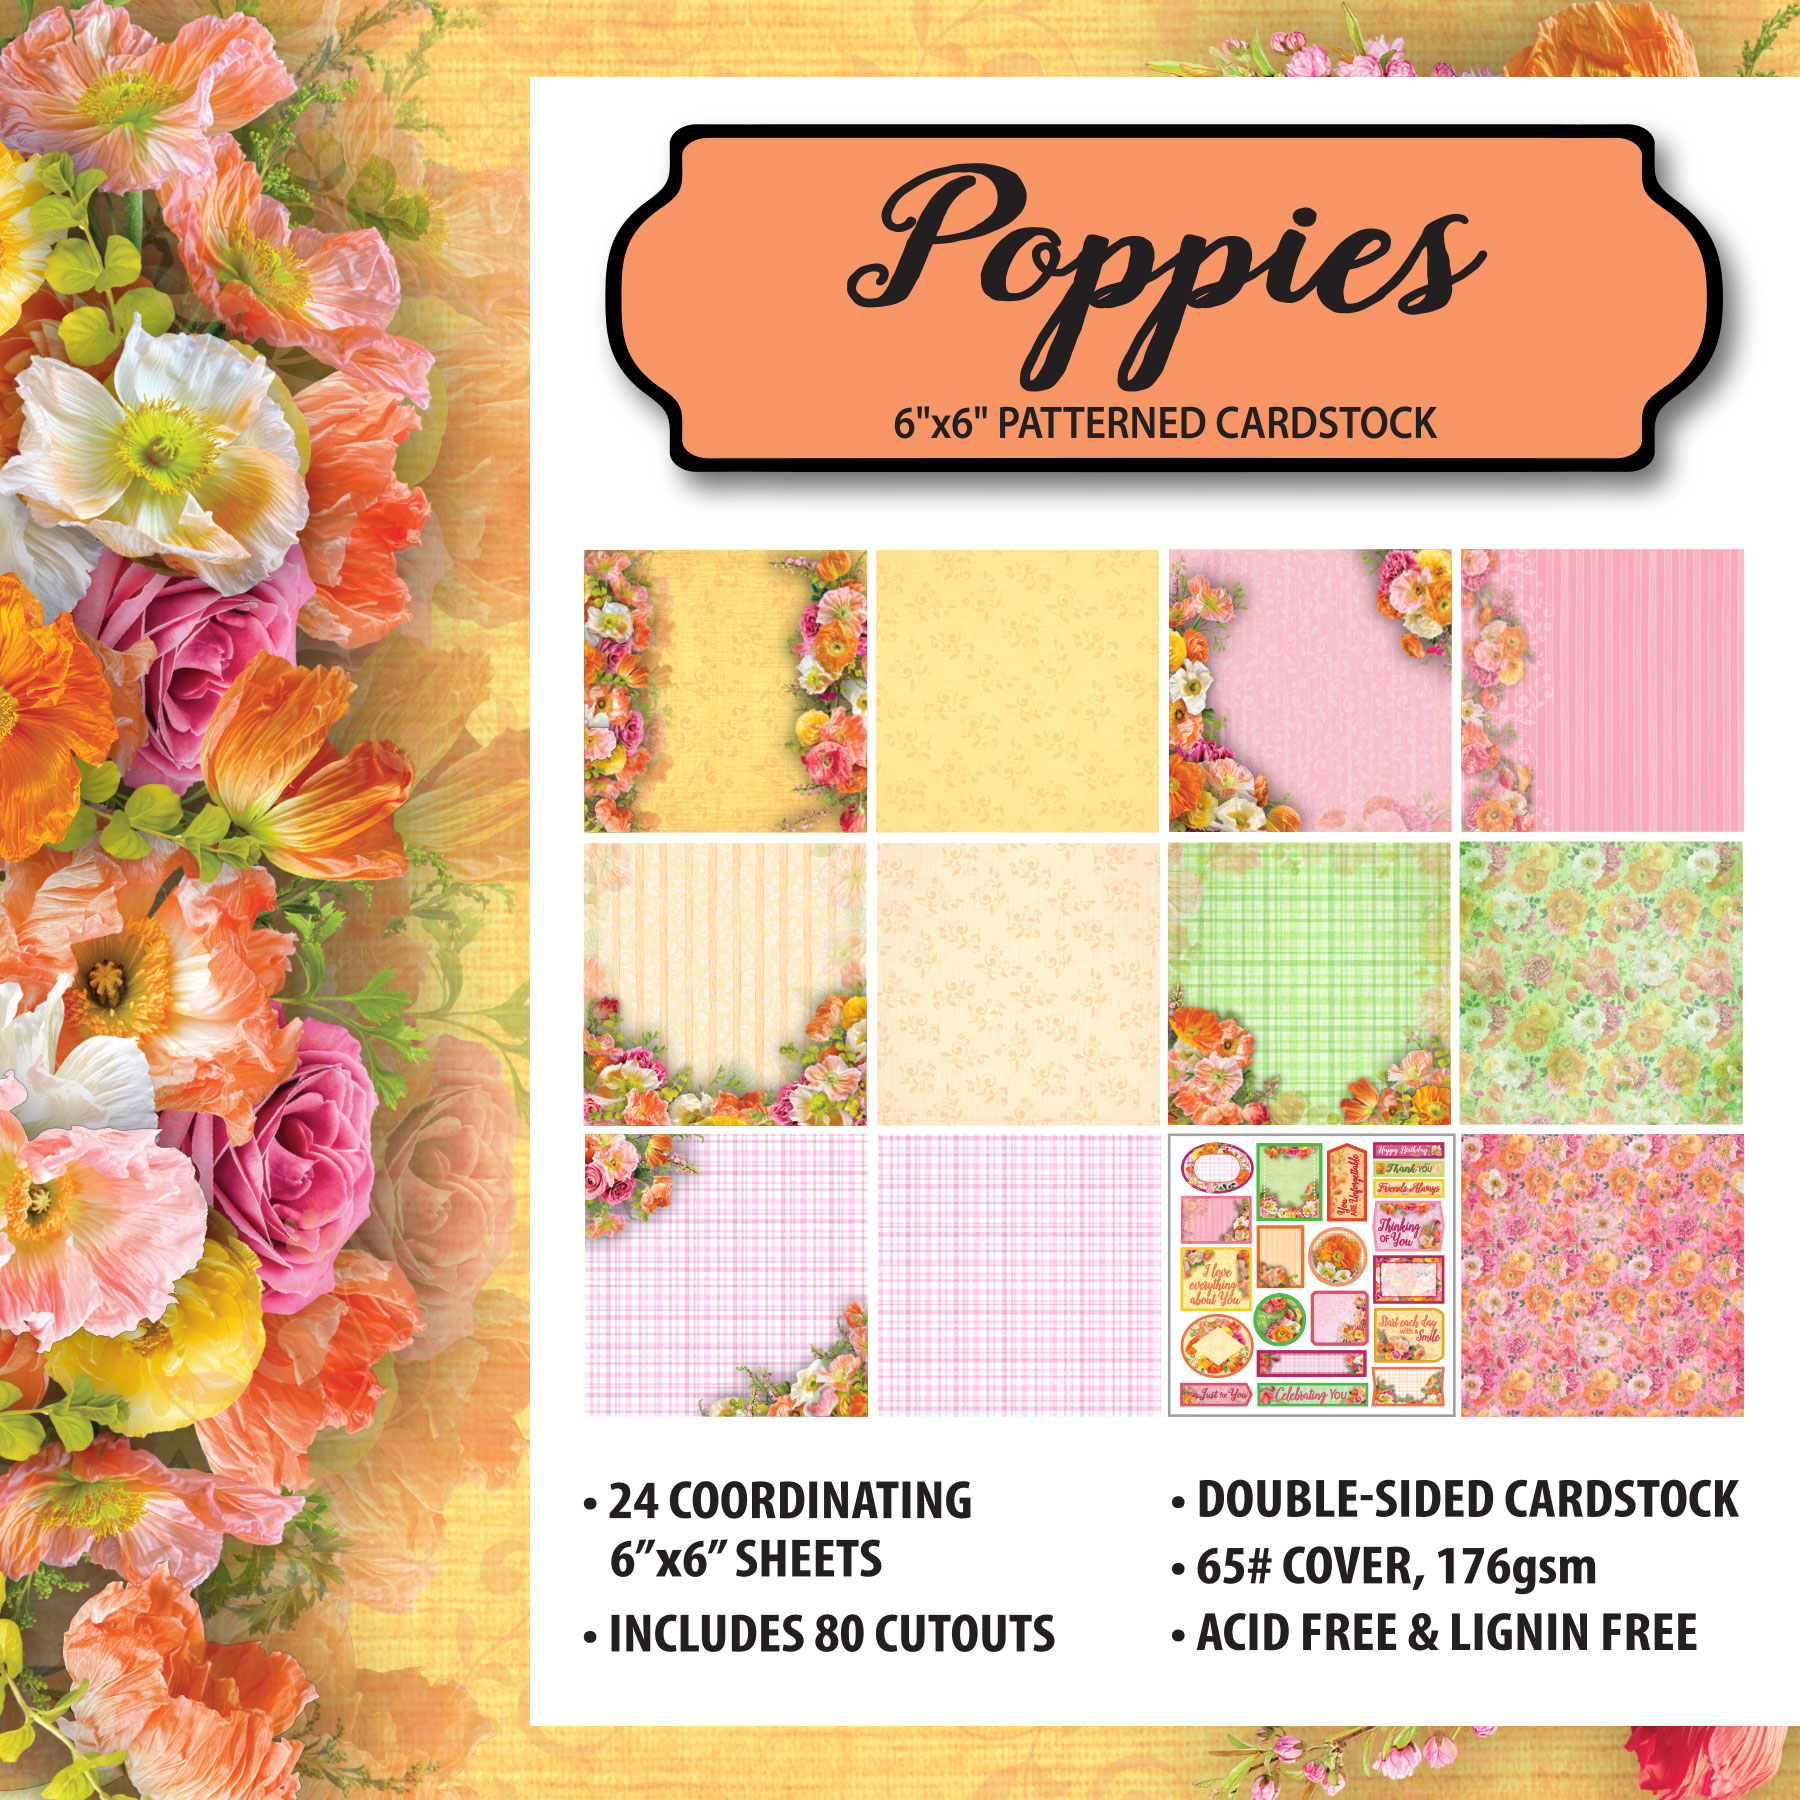 Poppies 6x6 Patterned Cardstock